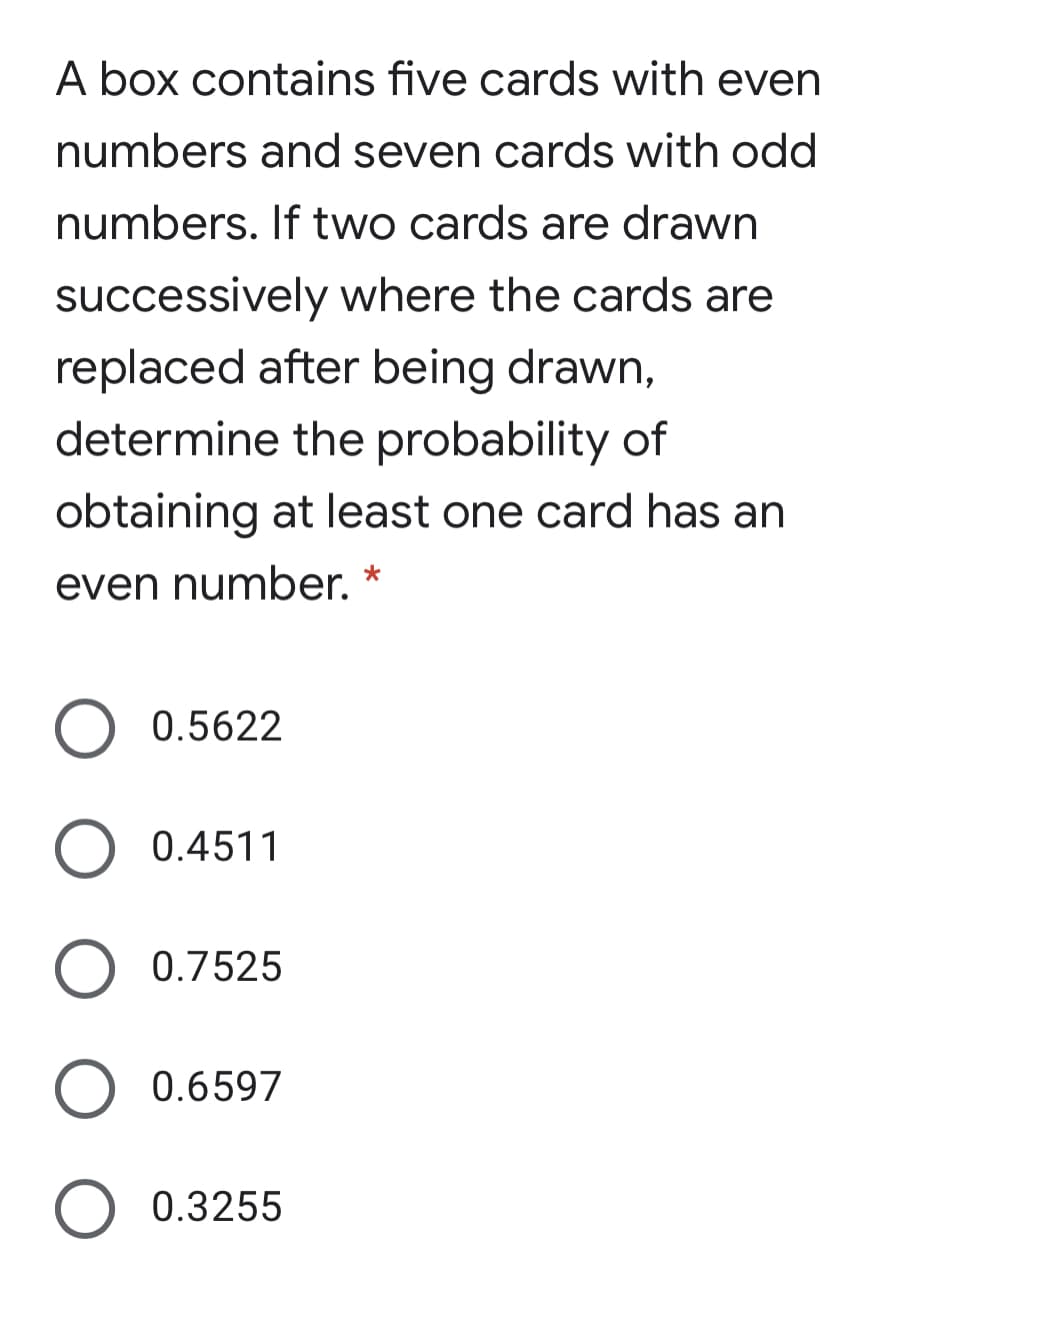 A box contains five cards with even
numbers and seven cards with odd
numbers. If two cards are drawn
successively where the cards are
replaced after being drawn,
determine the probability of
obtaining at least one card has an
even number. *
0.5622
0.4511
0.7525
0.6597
0.3255
